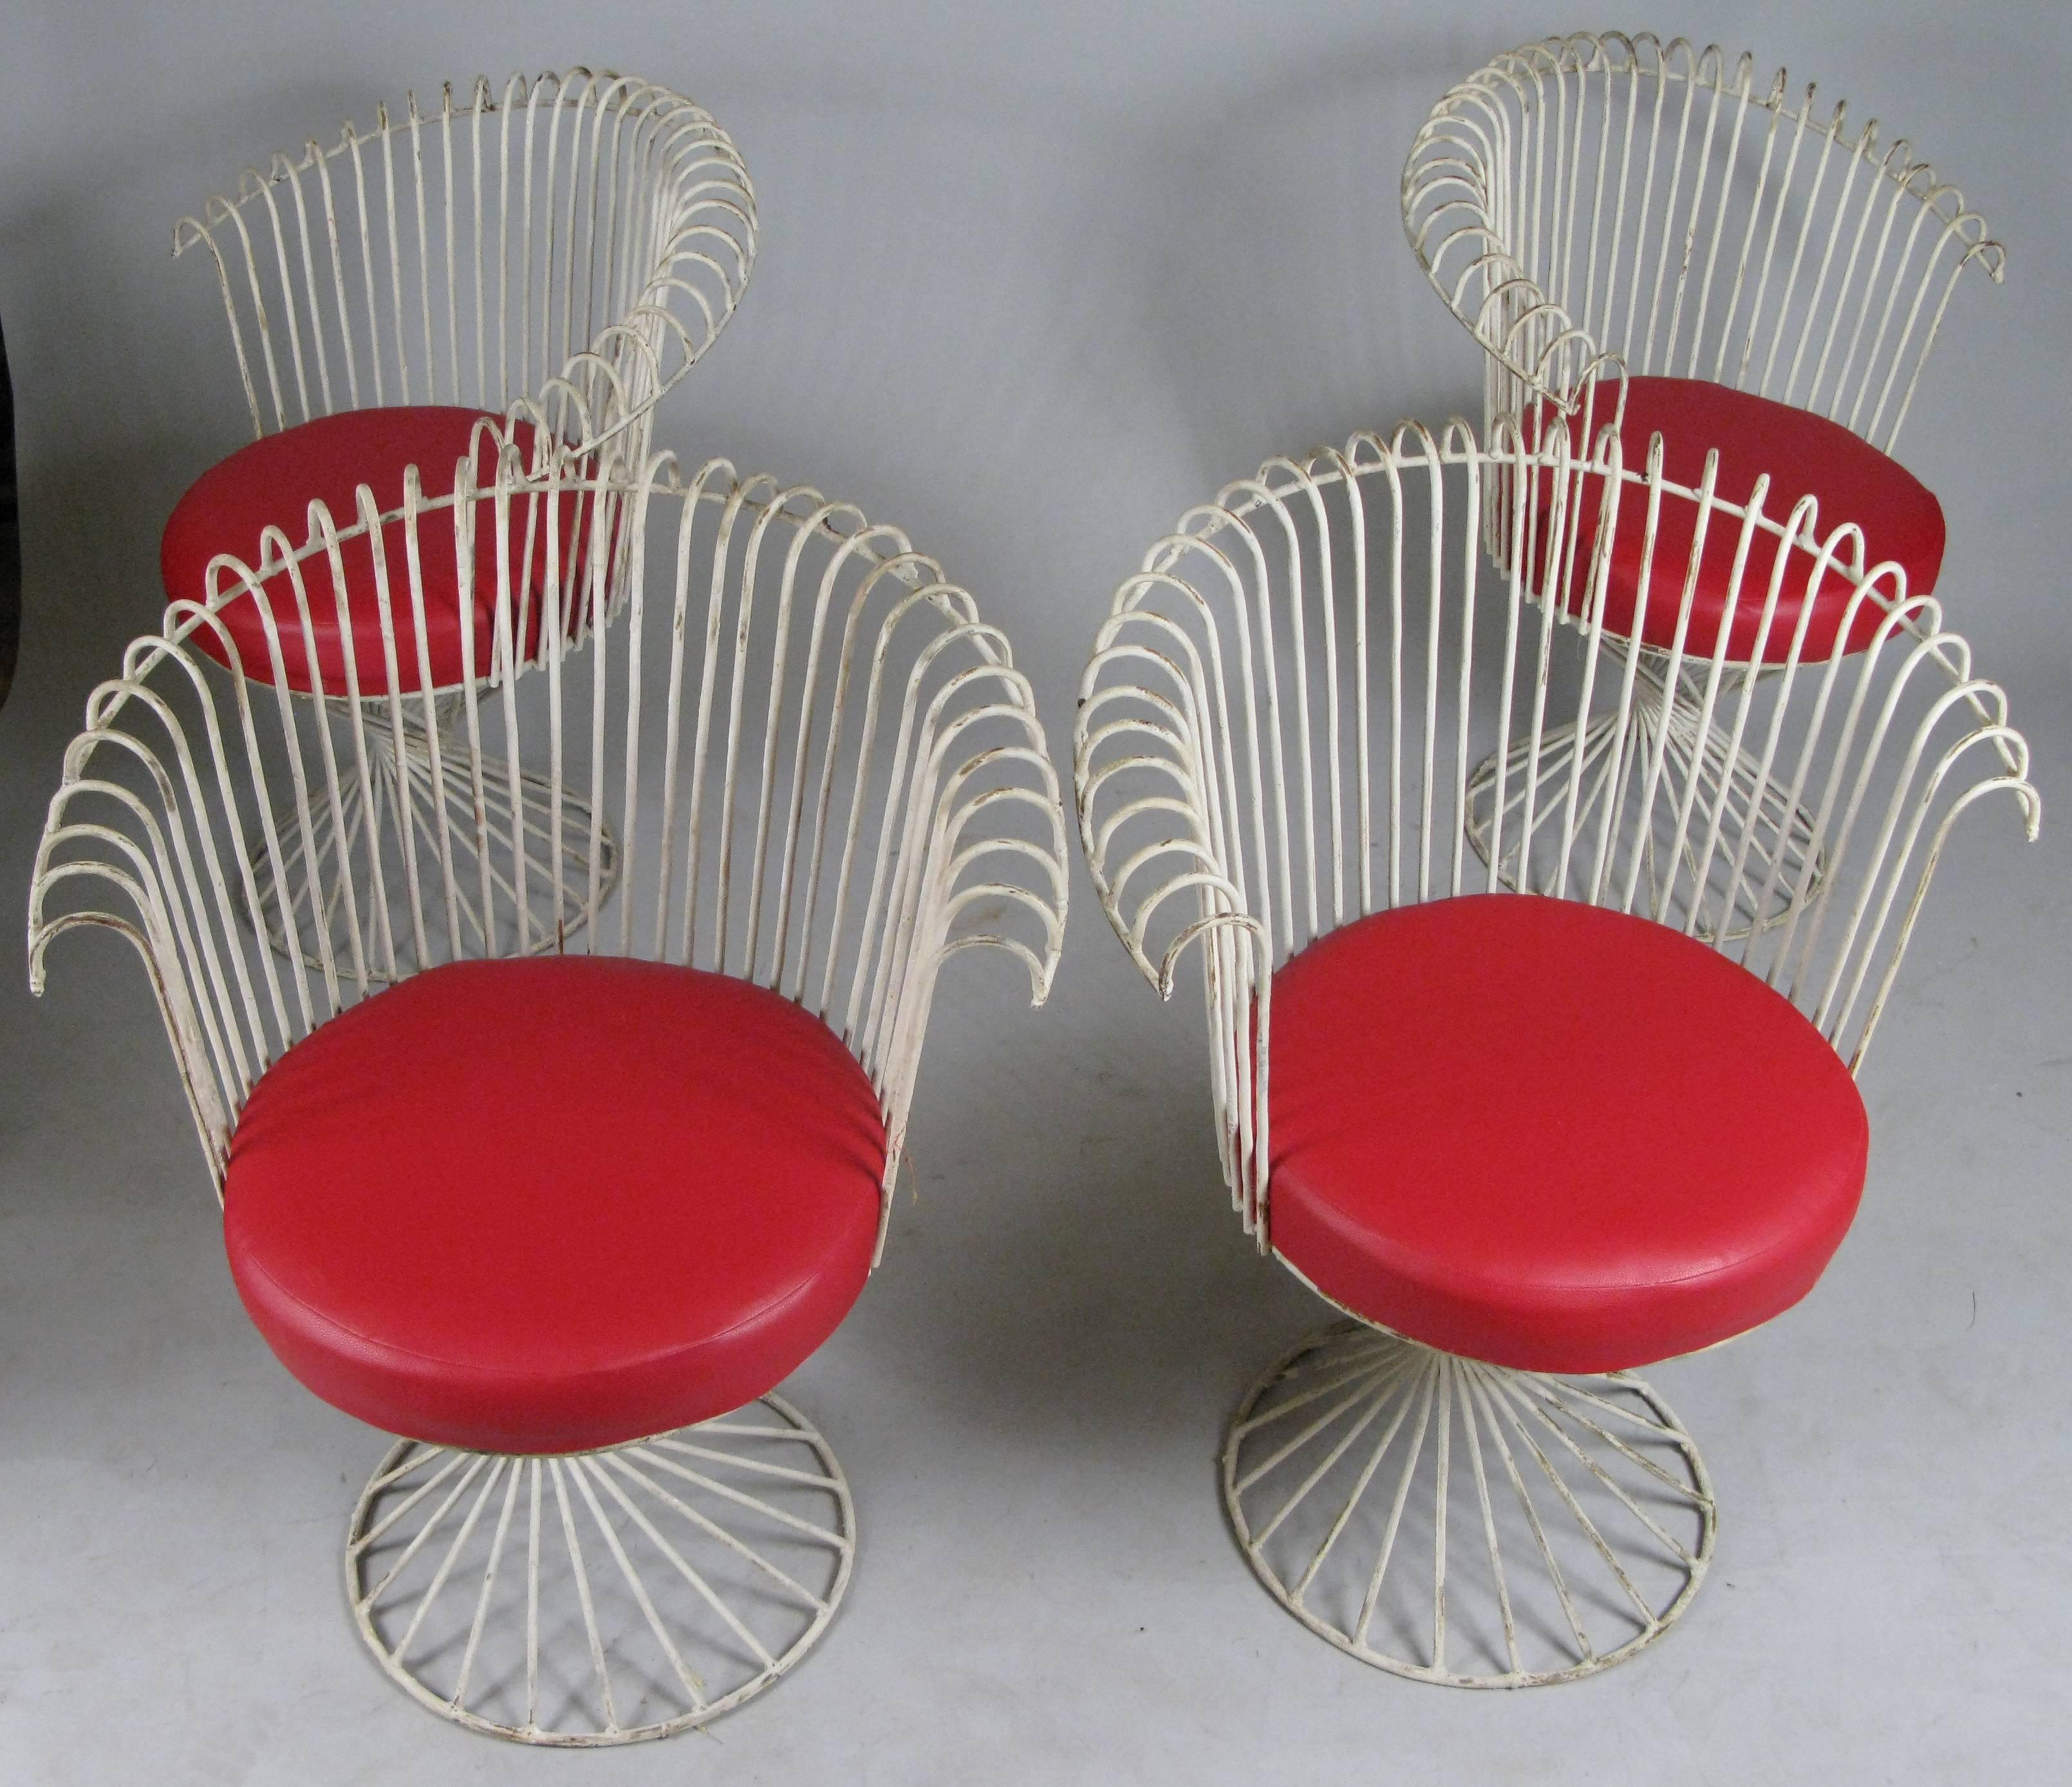 A lovely set of four curved wrought iron garden chairs in the manner of Mathieu Mategot. Beautifully made with the original white painted finish in fair condition and red vinyl seat cushions.